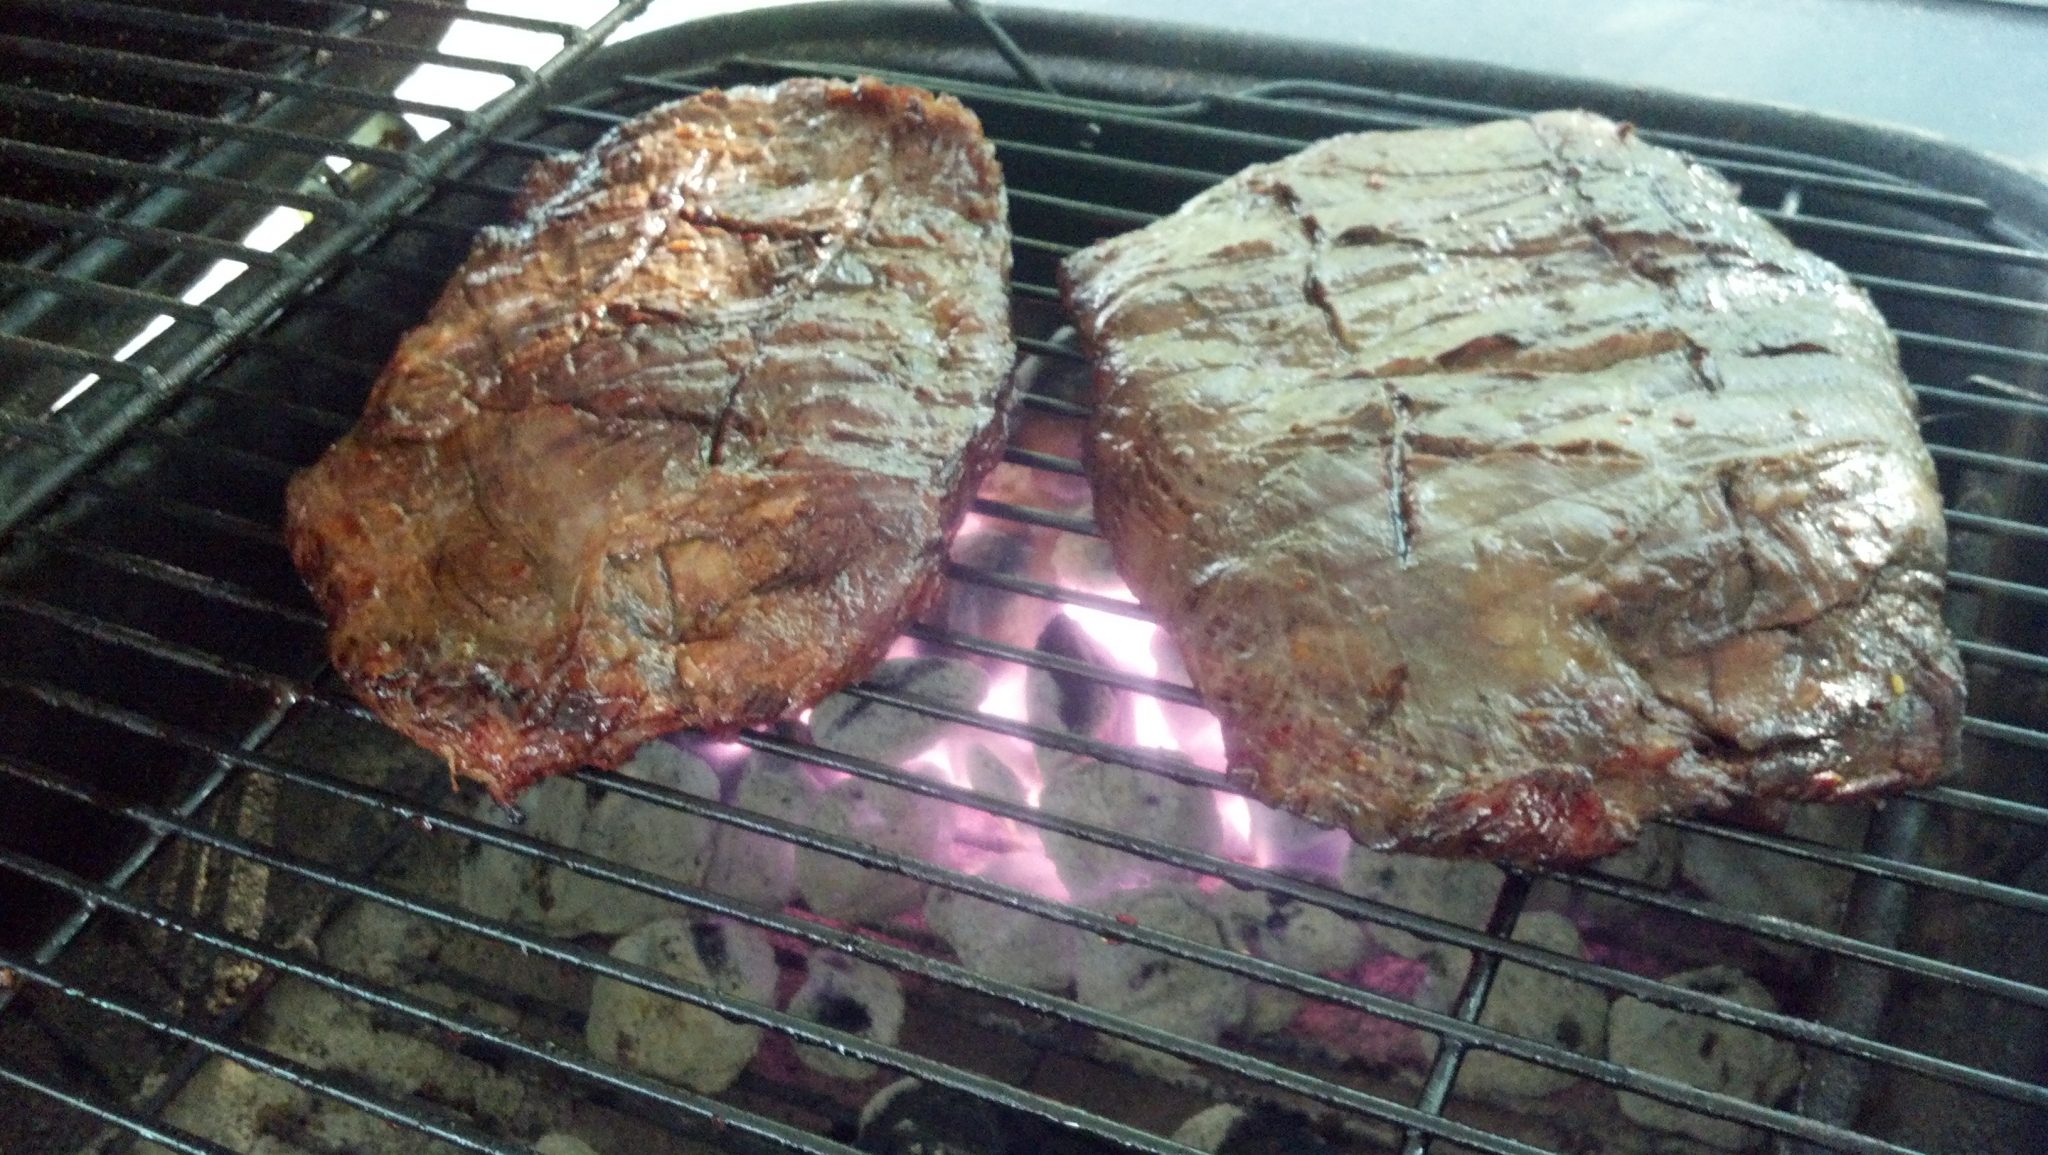 Flank steaks on the grill